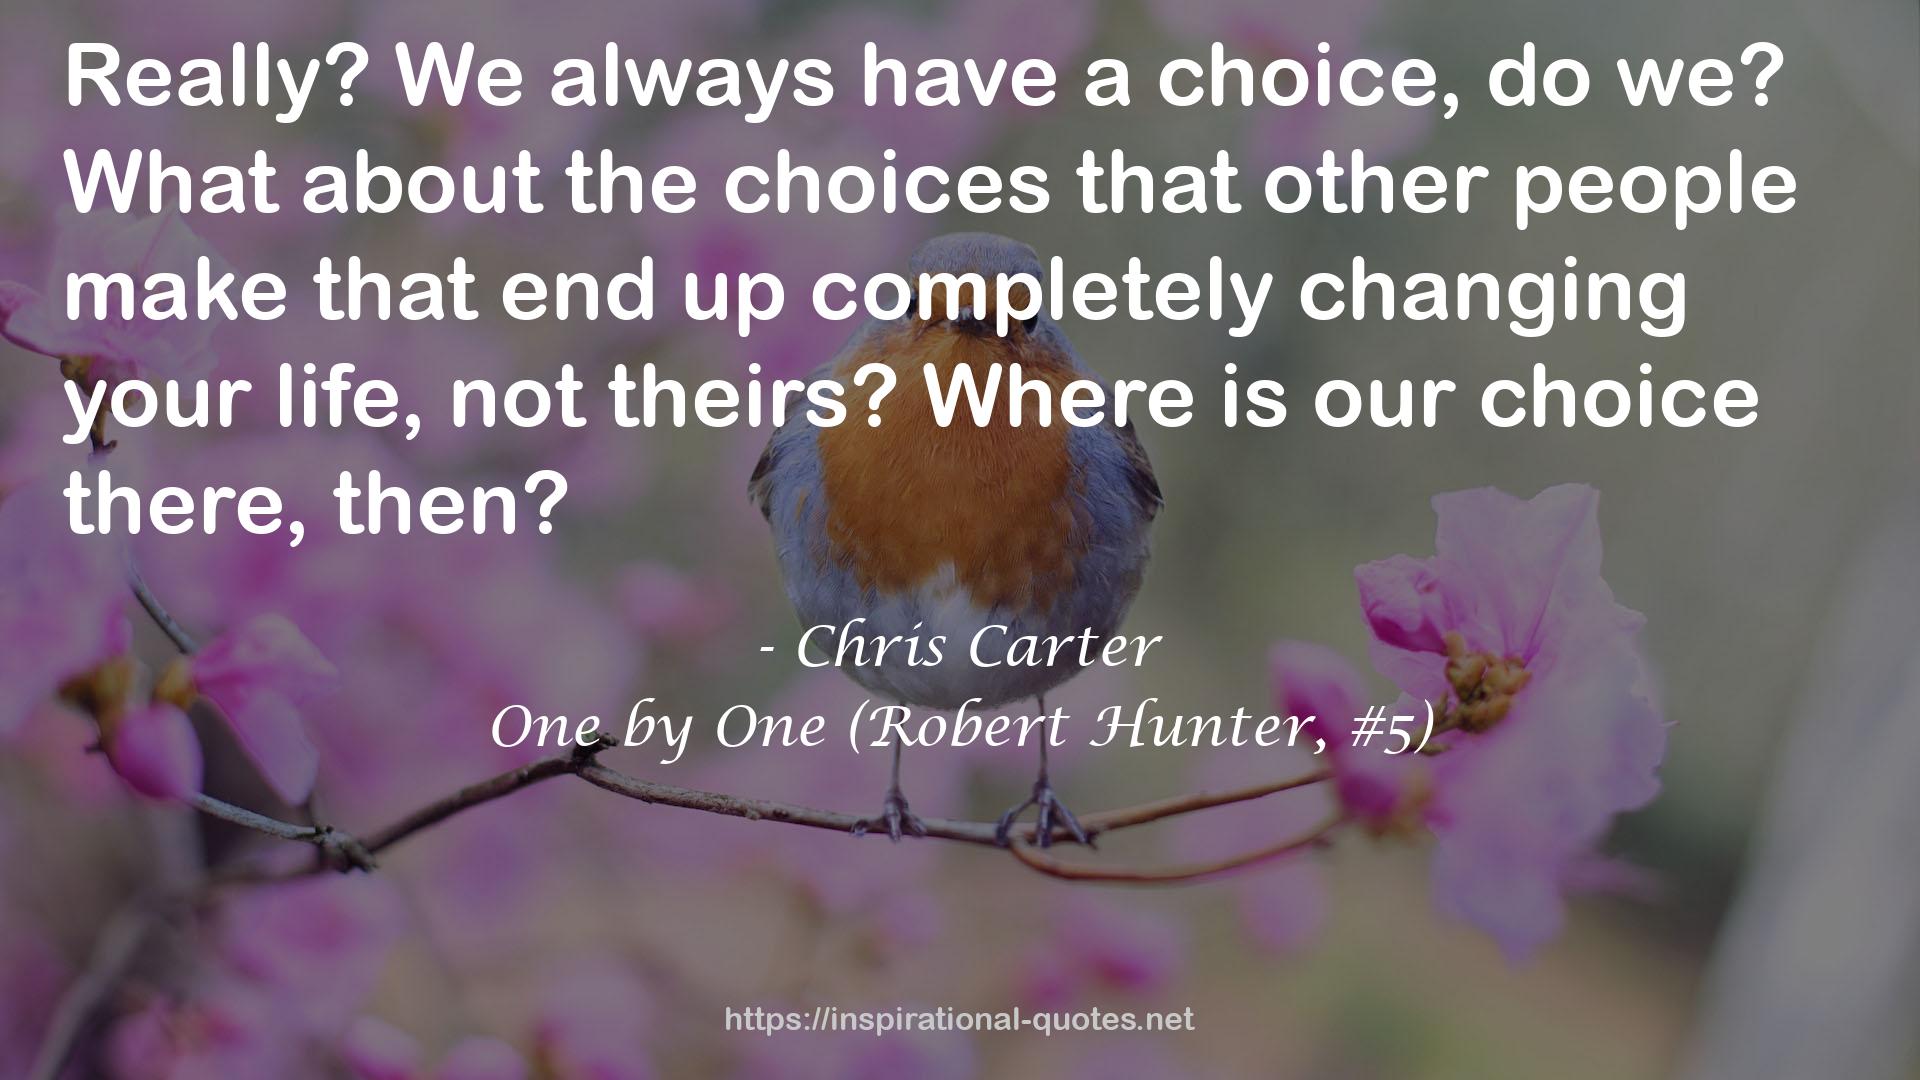 One by One (Robert Hunter, #5) QUOTES